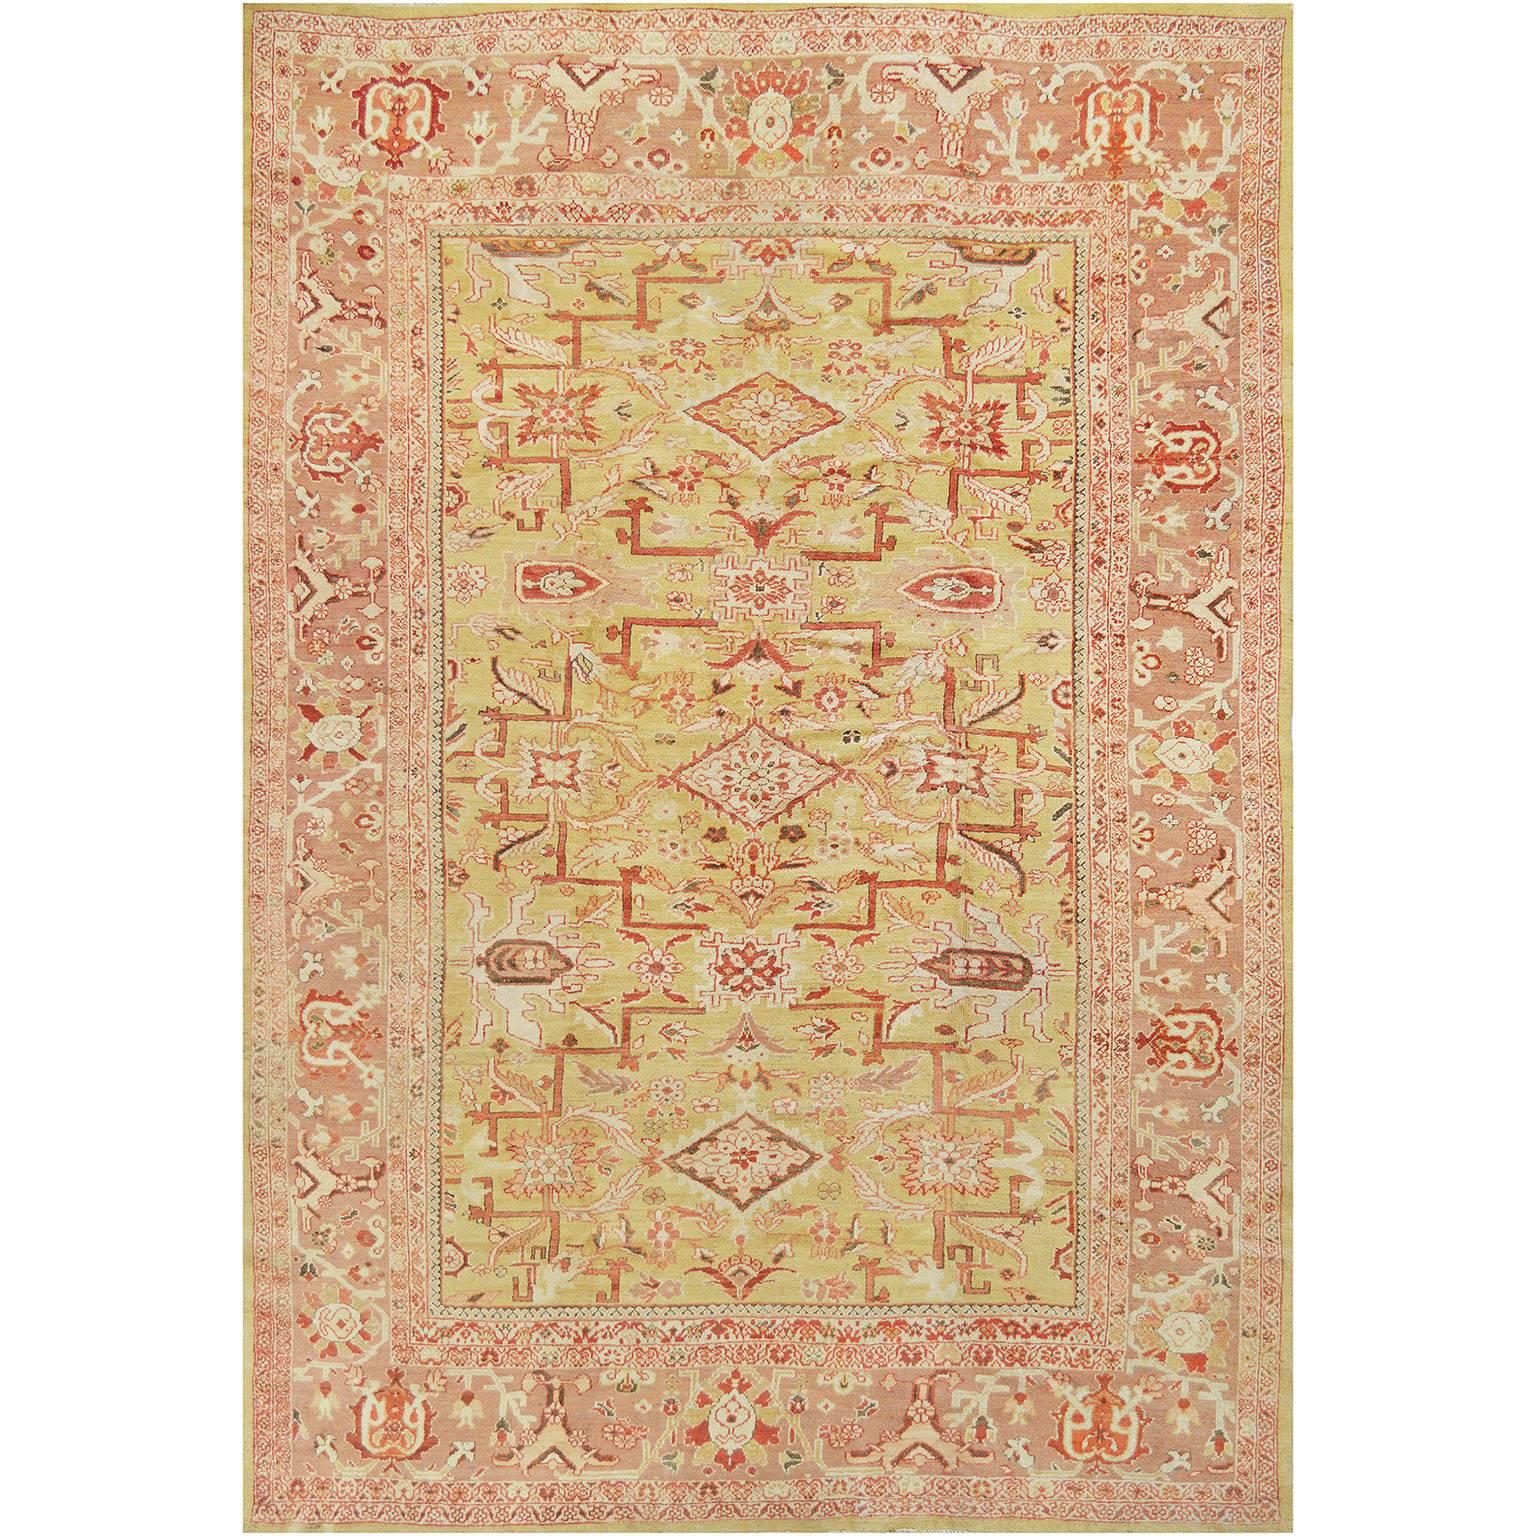 Late 19th Century Ziegler Sultanabad Rug from West Persia